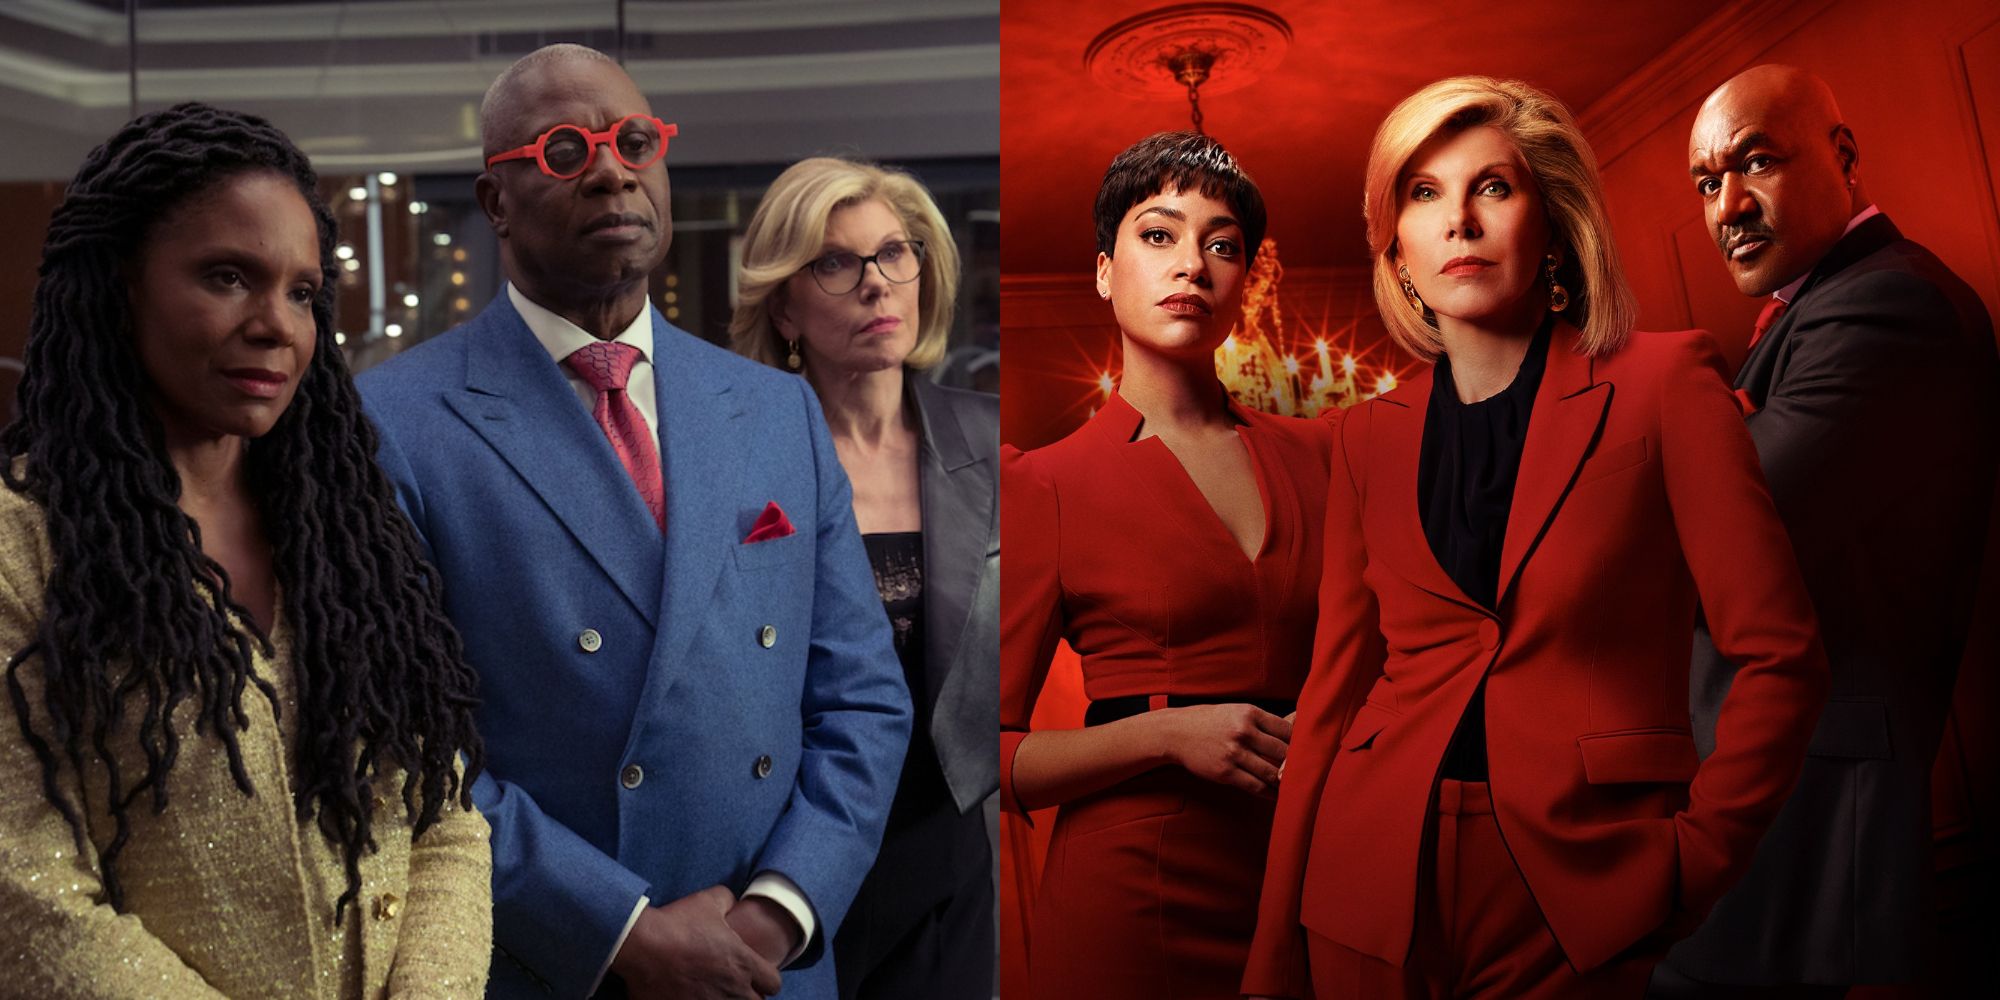 Two images of the cast of The Good Fight